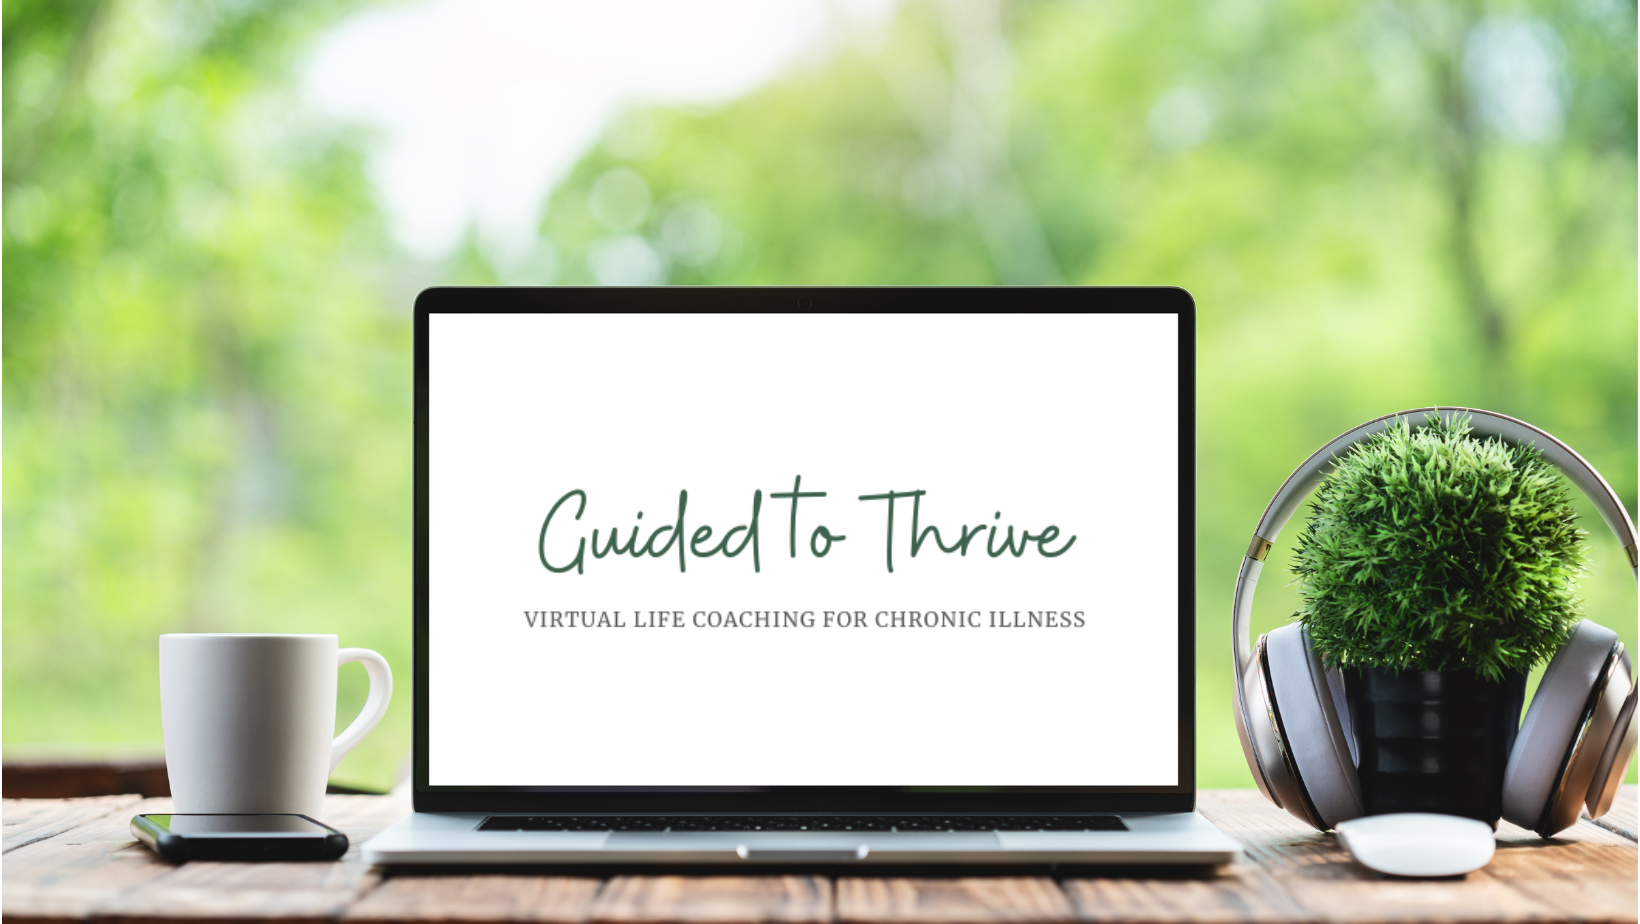 Guided to Thrive: Virtual Life Coaching for Adapting to Chronic Illness Logo | Image Description: An outline of a tree with leaves and lines indicating the ground on either side of the trunk with the words "Guided to Thrive" written in a script font above the words "Virtual Coaching for Chronic Illness" in a serif font.